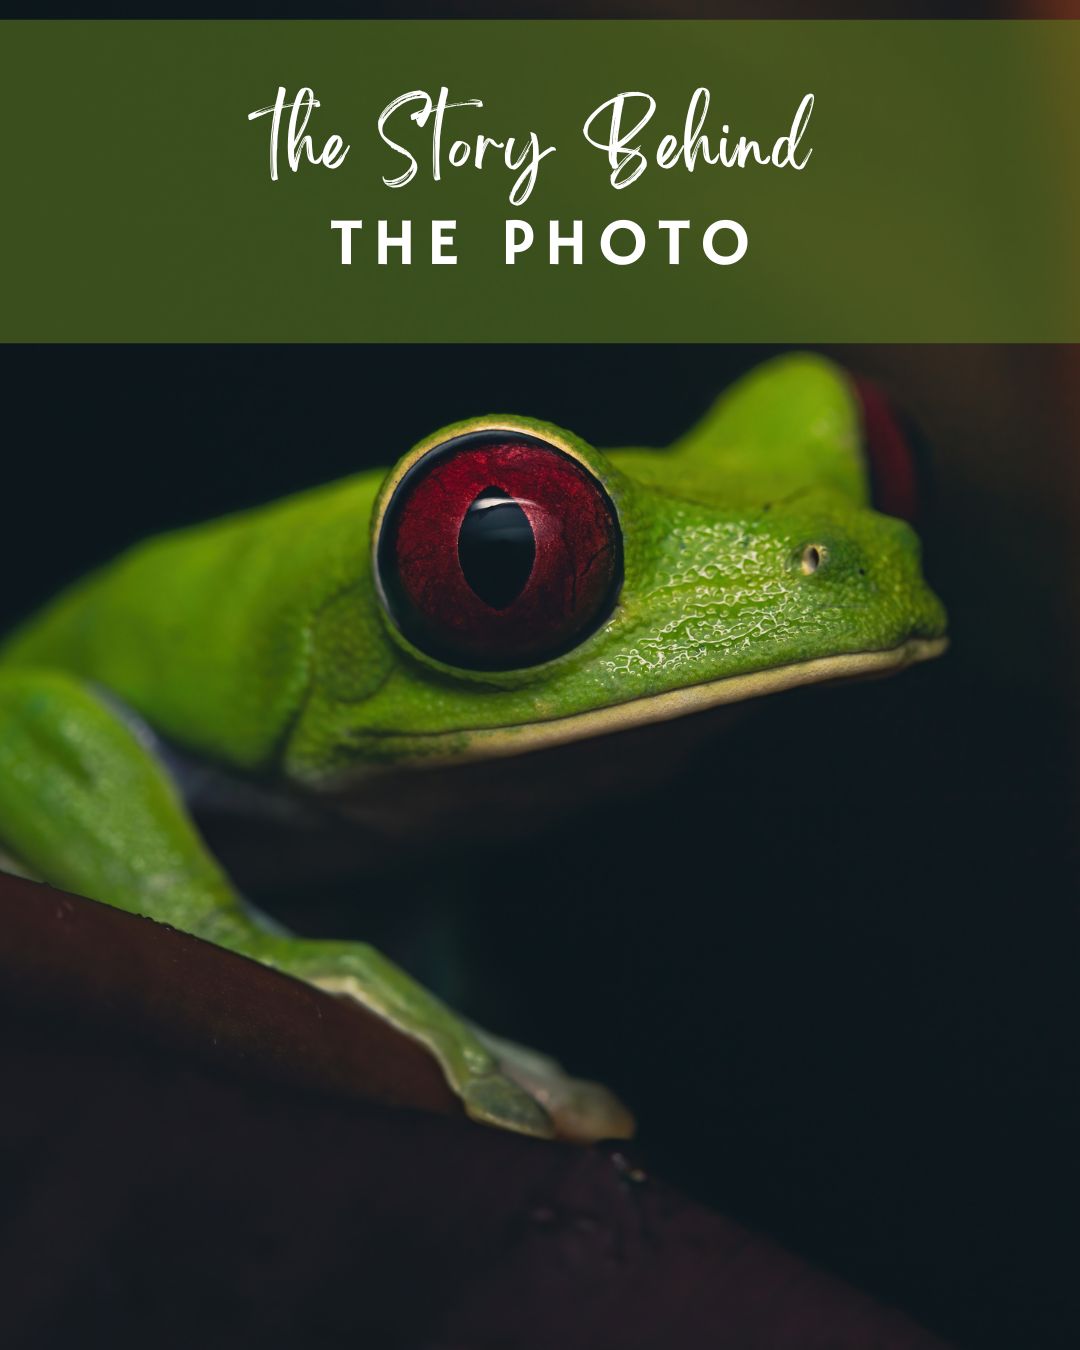 The story behind the photo: The Red-Eyed Tree Frog